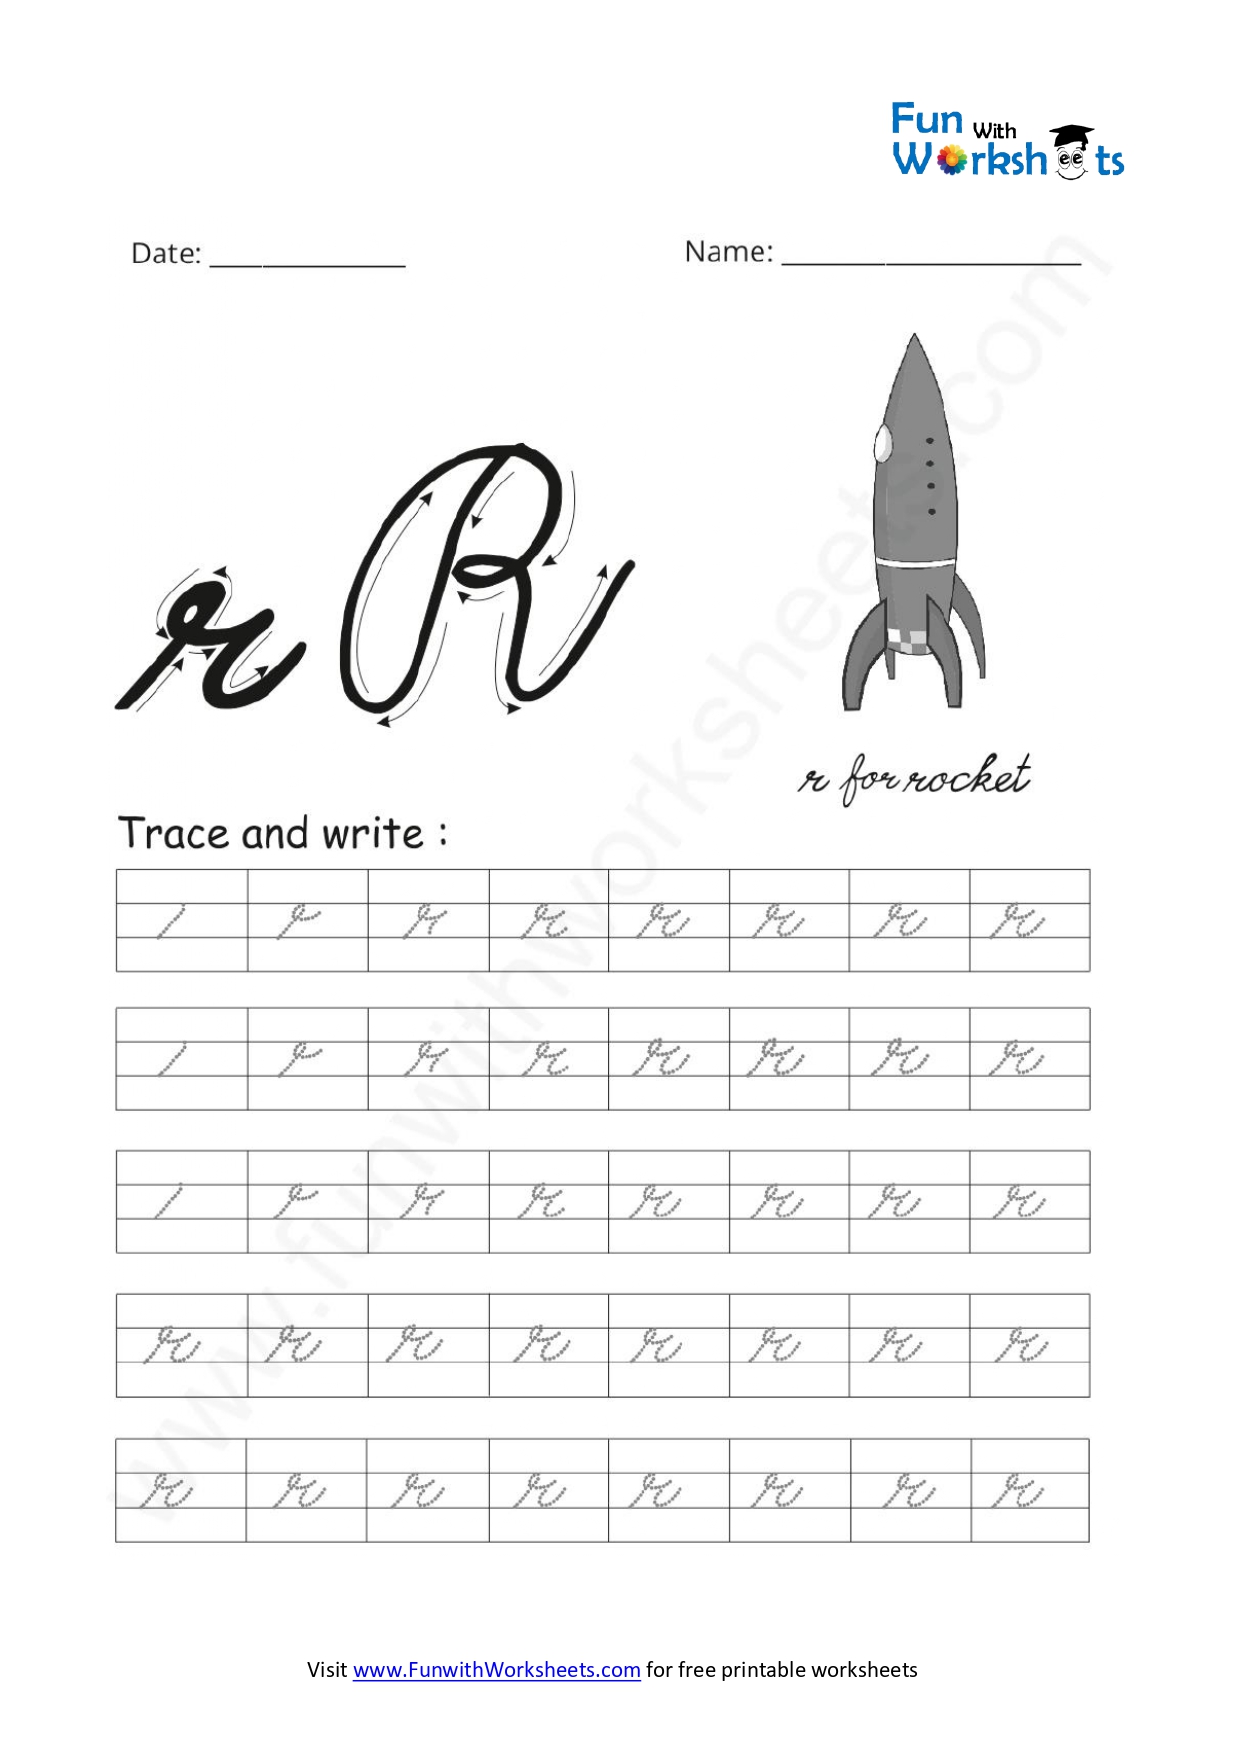 Free Printable Worksheets -Cursive Small letters Archives - Page 2 of 3 ...